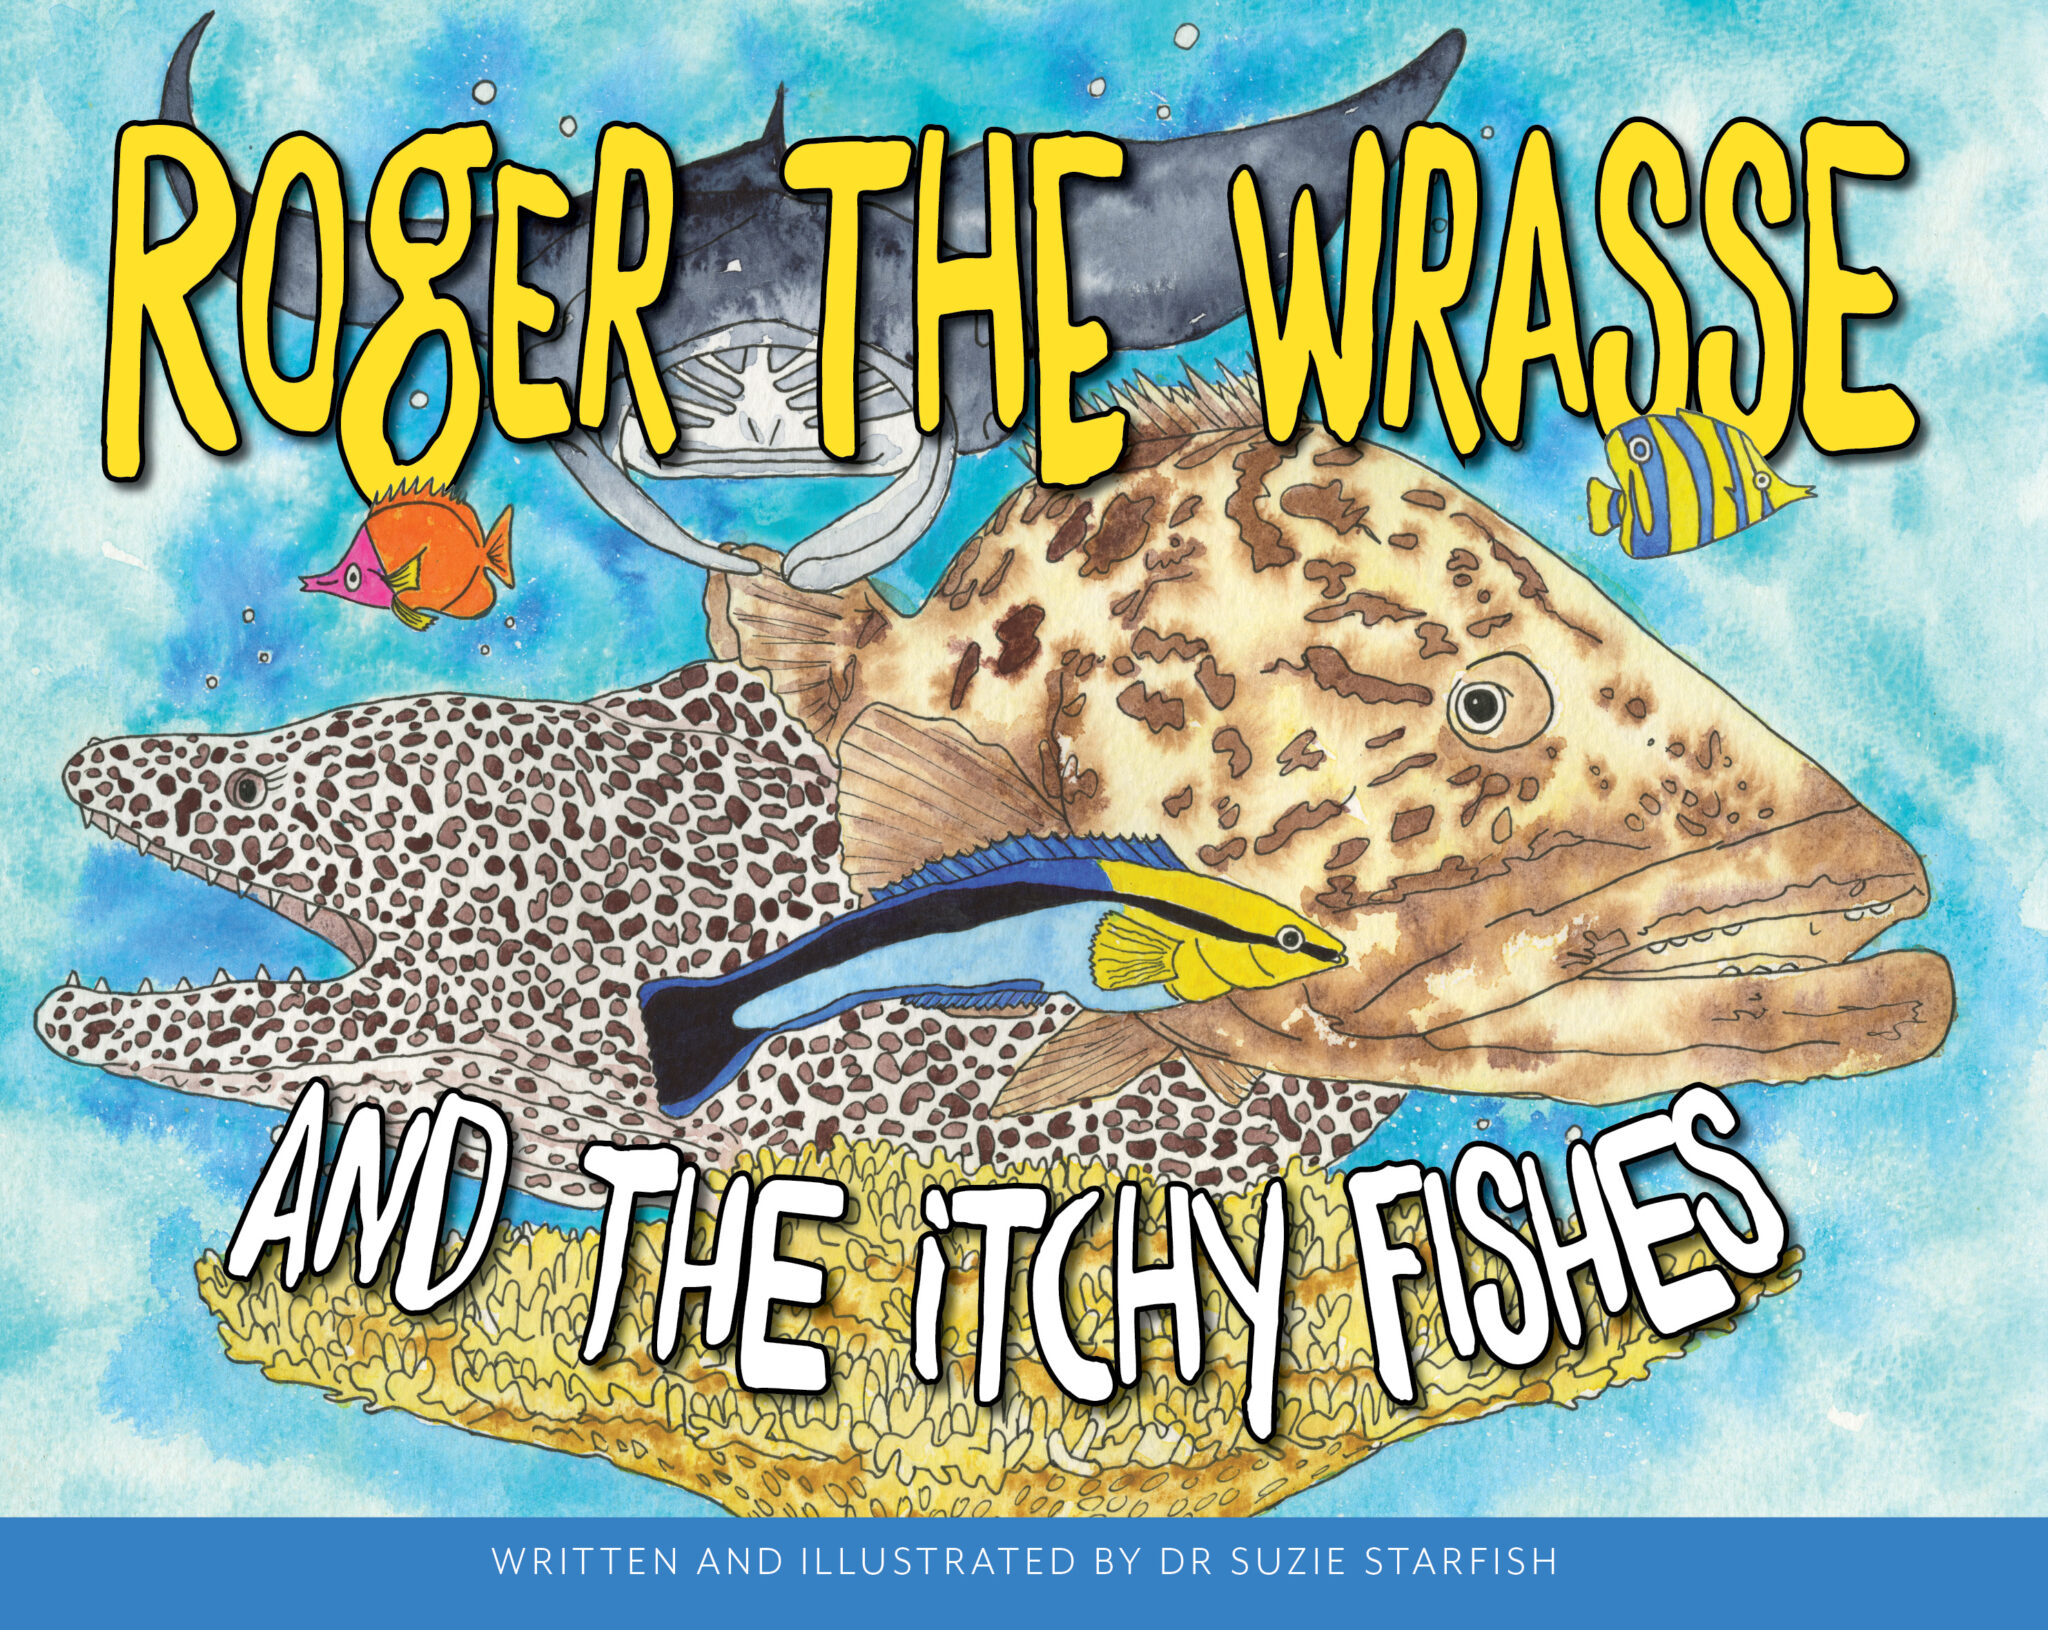 Roger the Wrasse and the itchy fishes